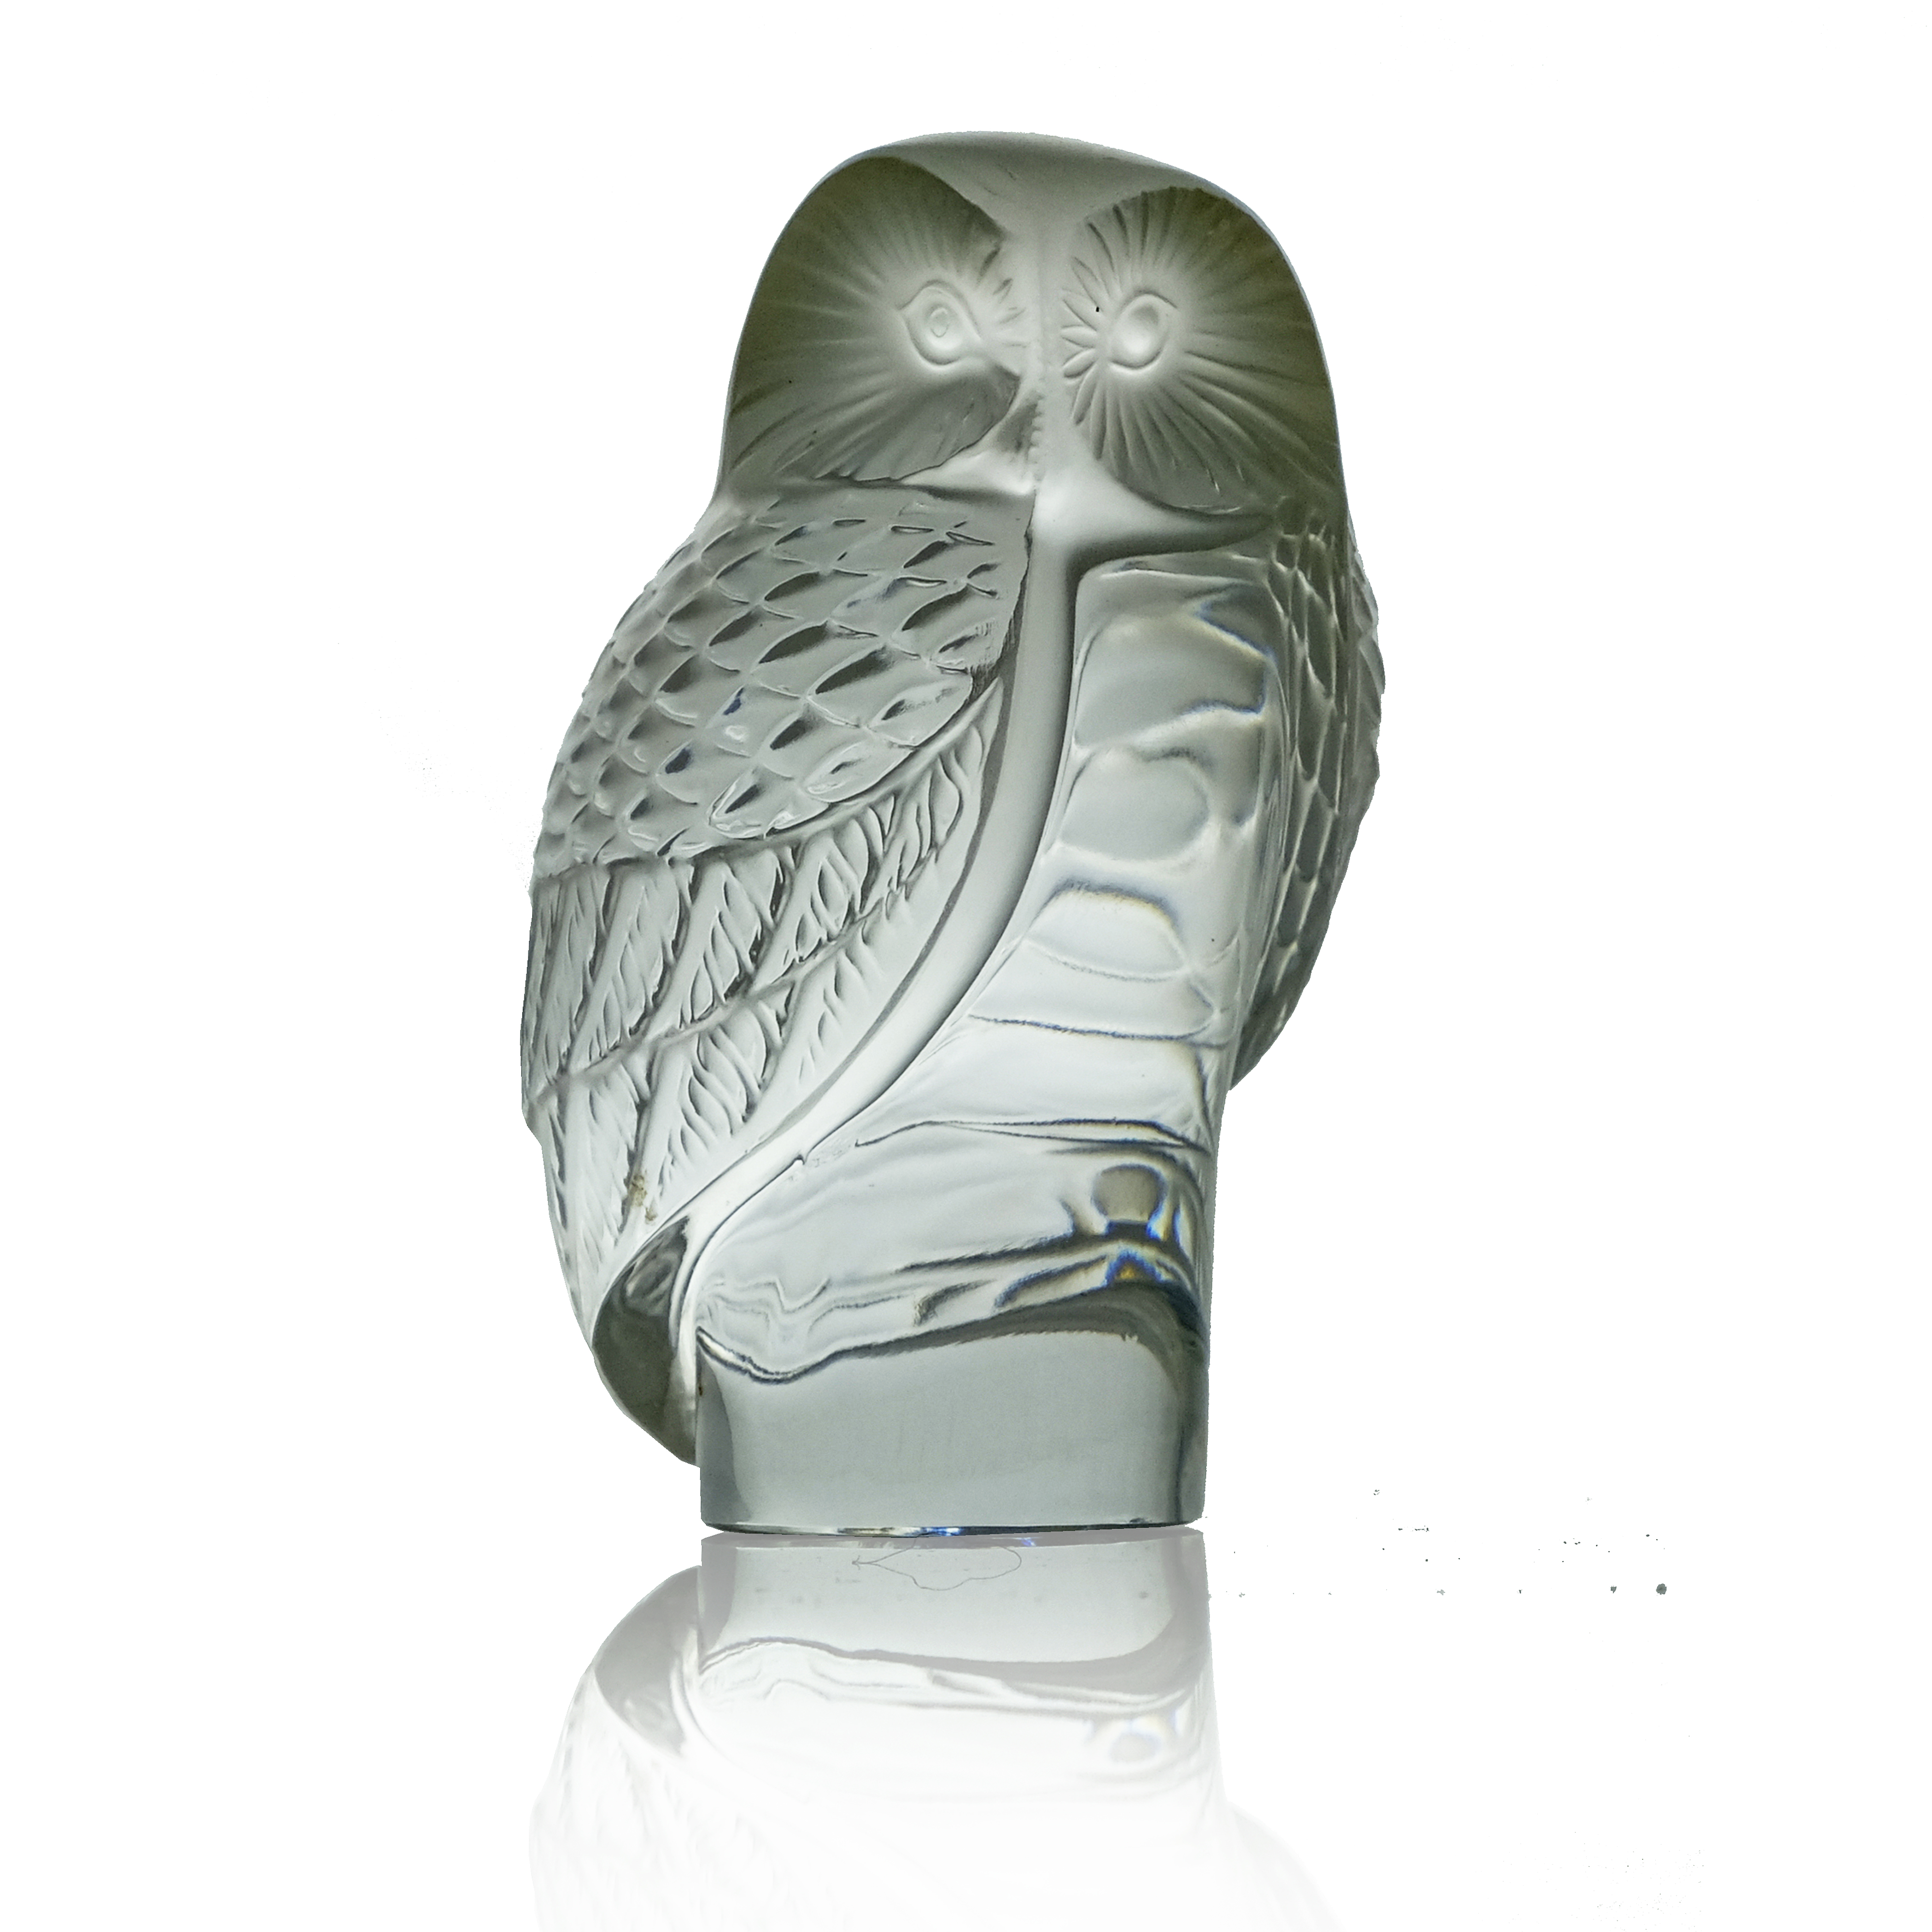 Lalique, a Chouette glass paprweight